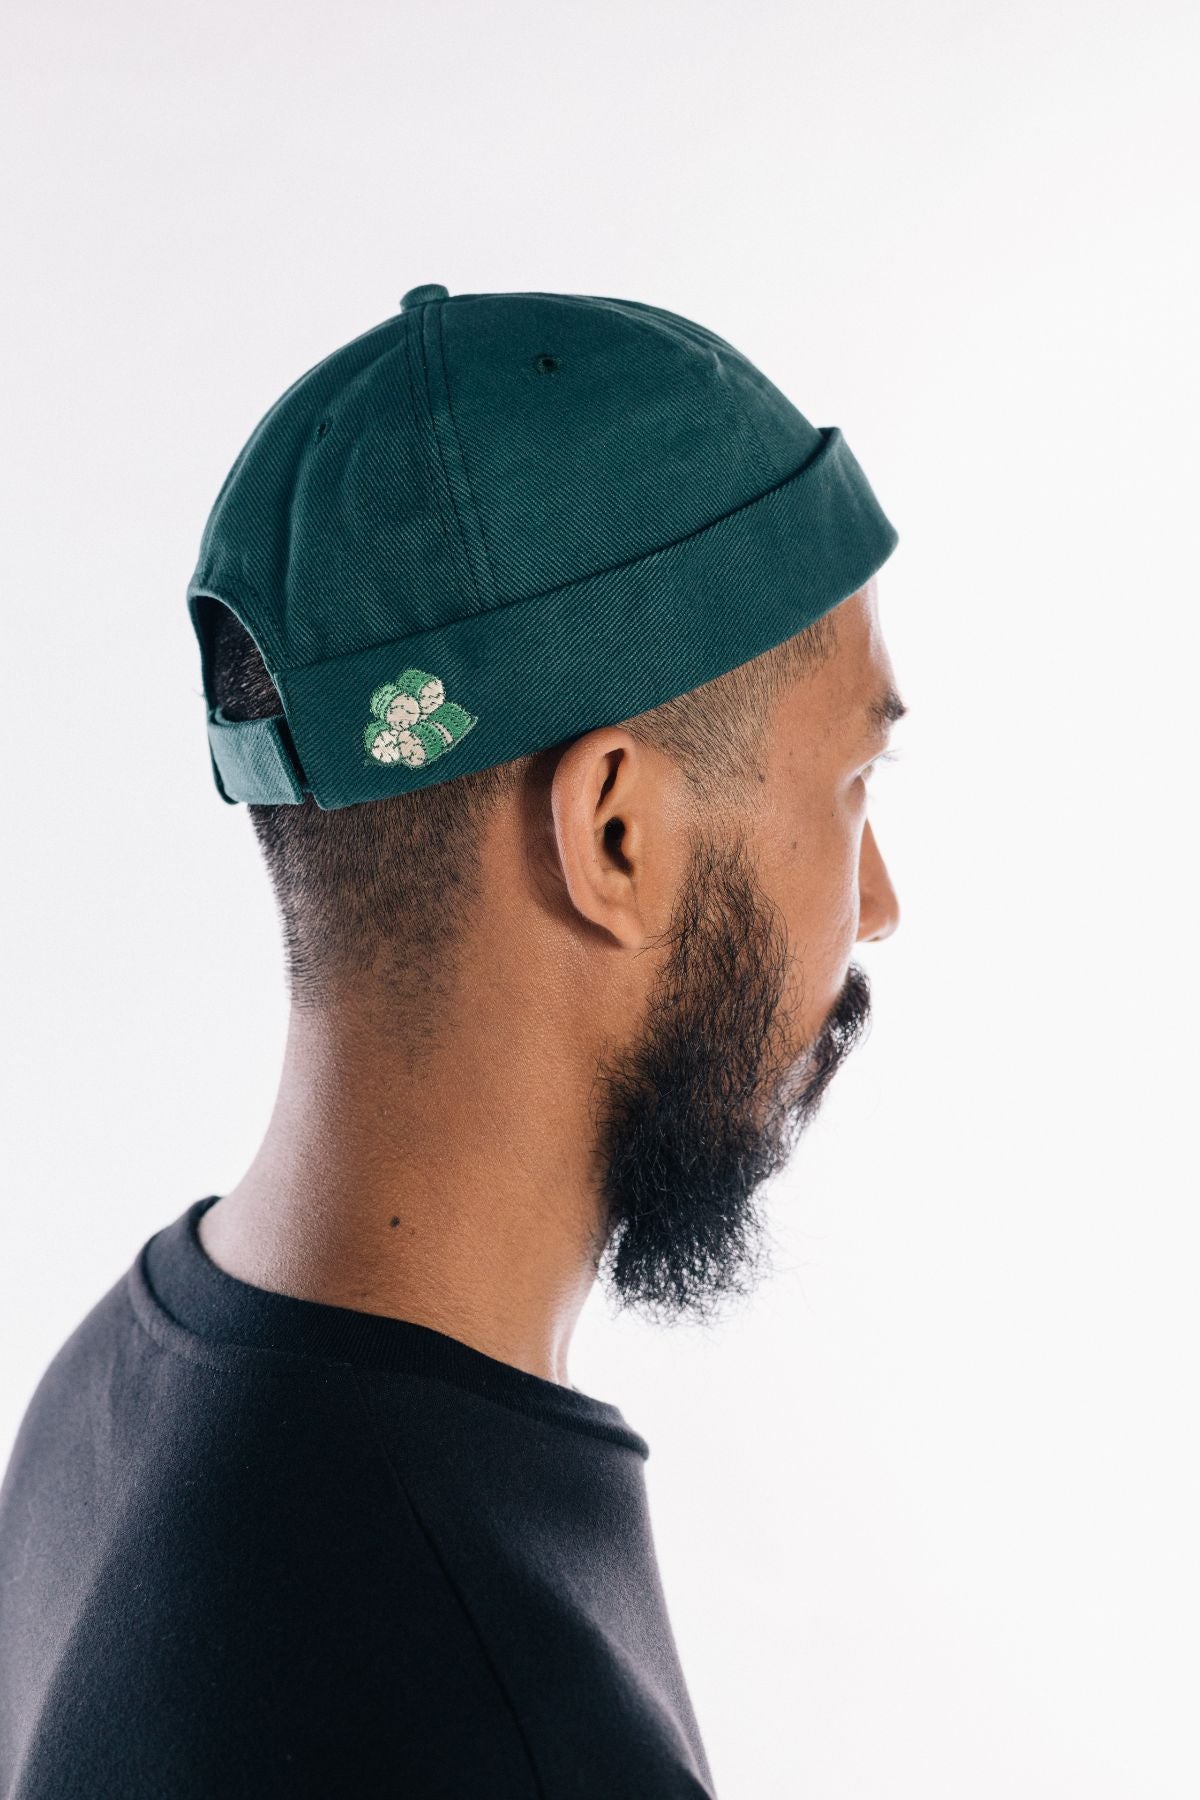 PMC x Shopee Lemang Bungkus Brimless Cap Forest Green